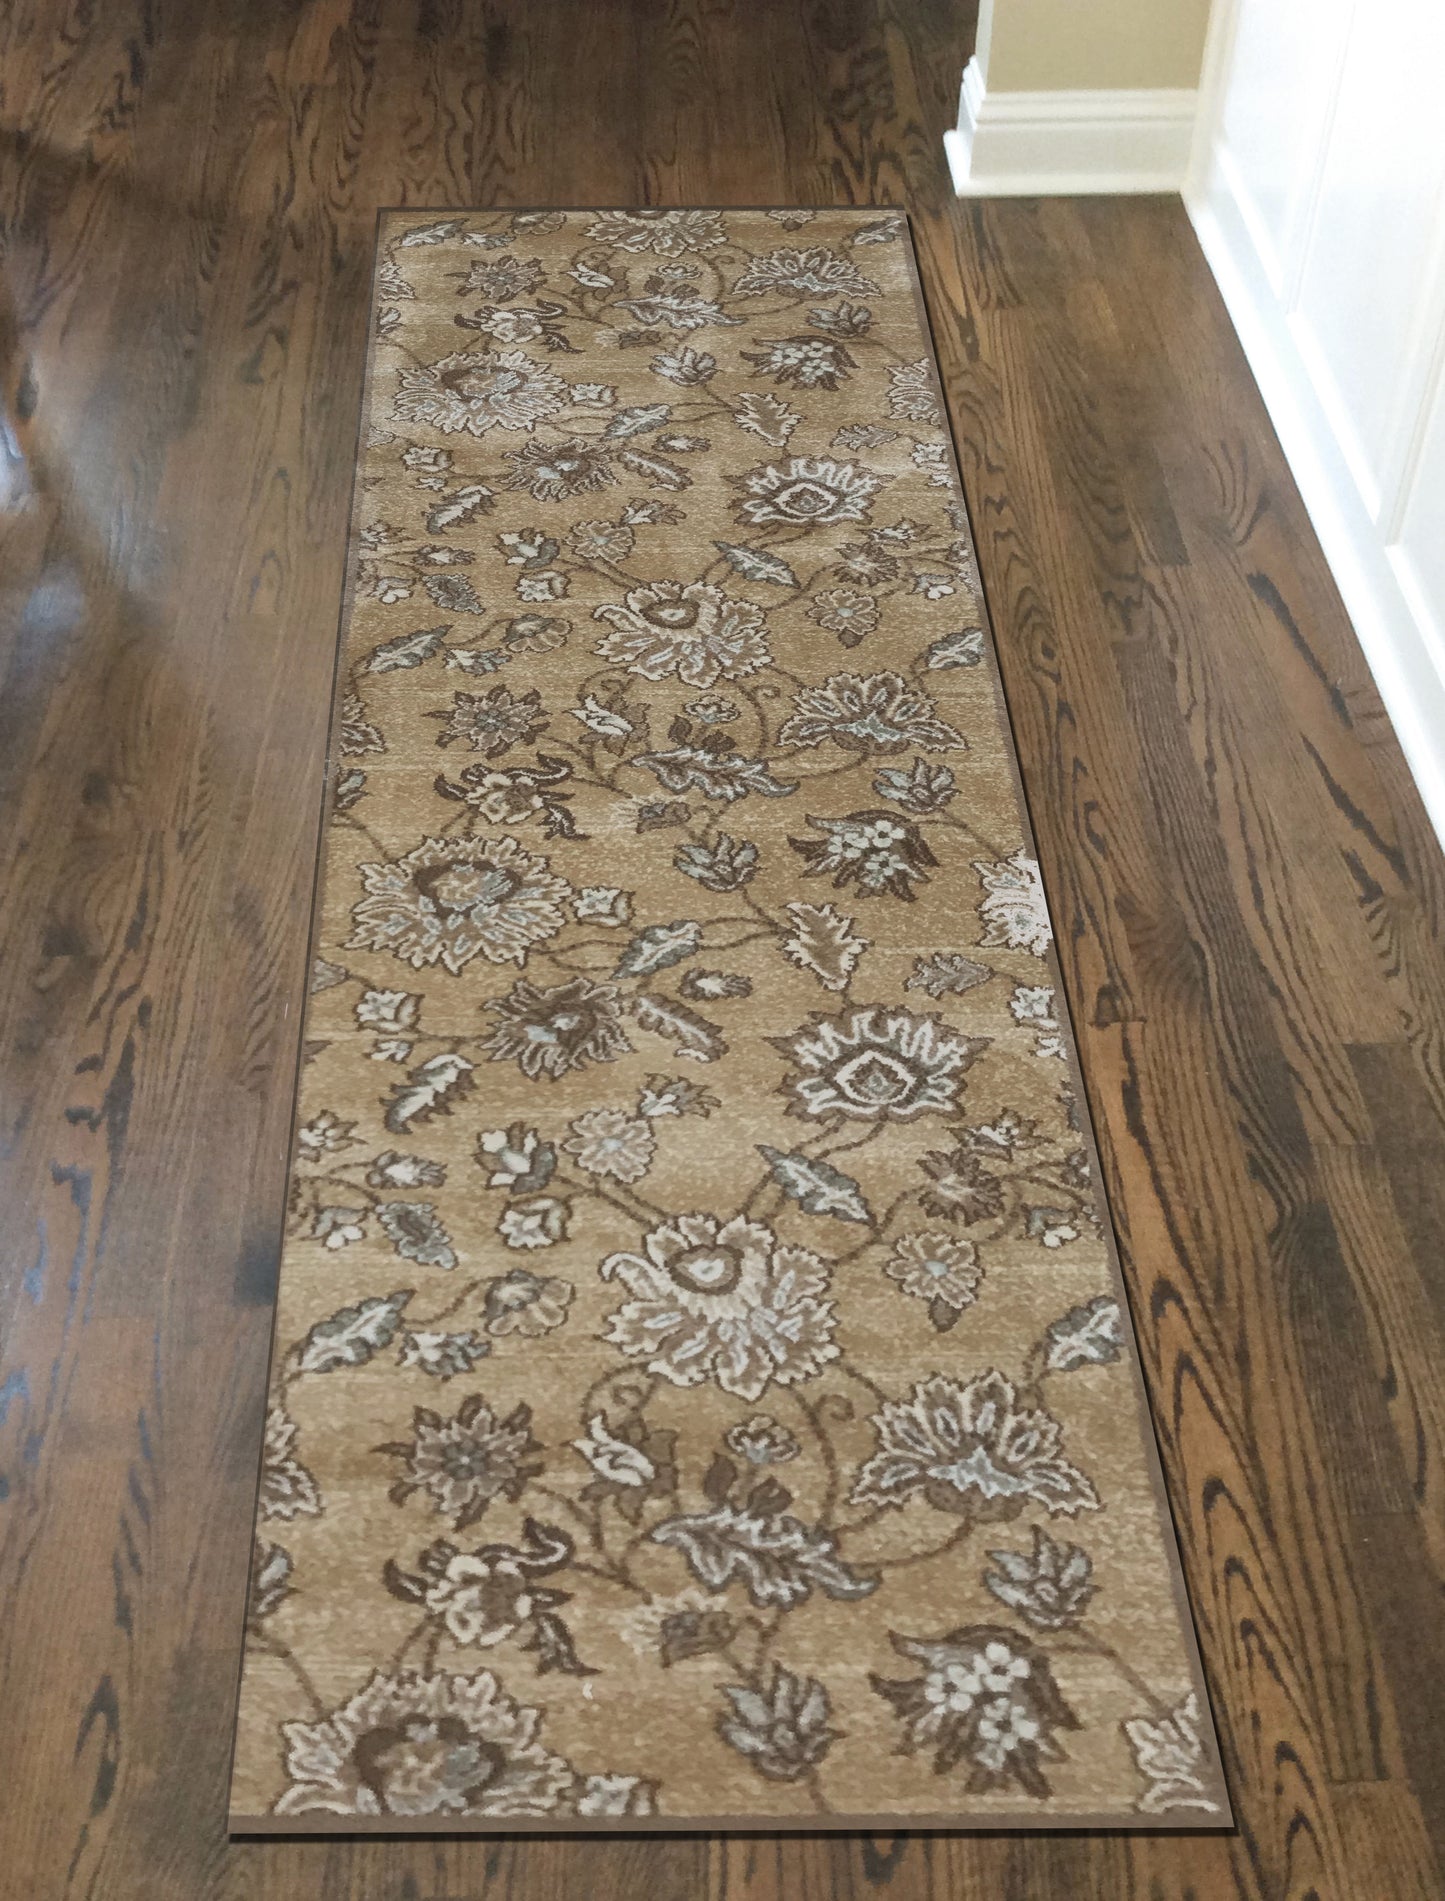 Pisa 3475 Machine Made Synthetic Blend Indoor Area Rug By Radici USA